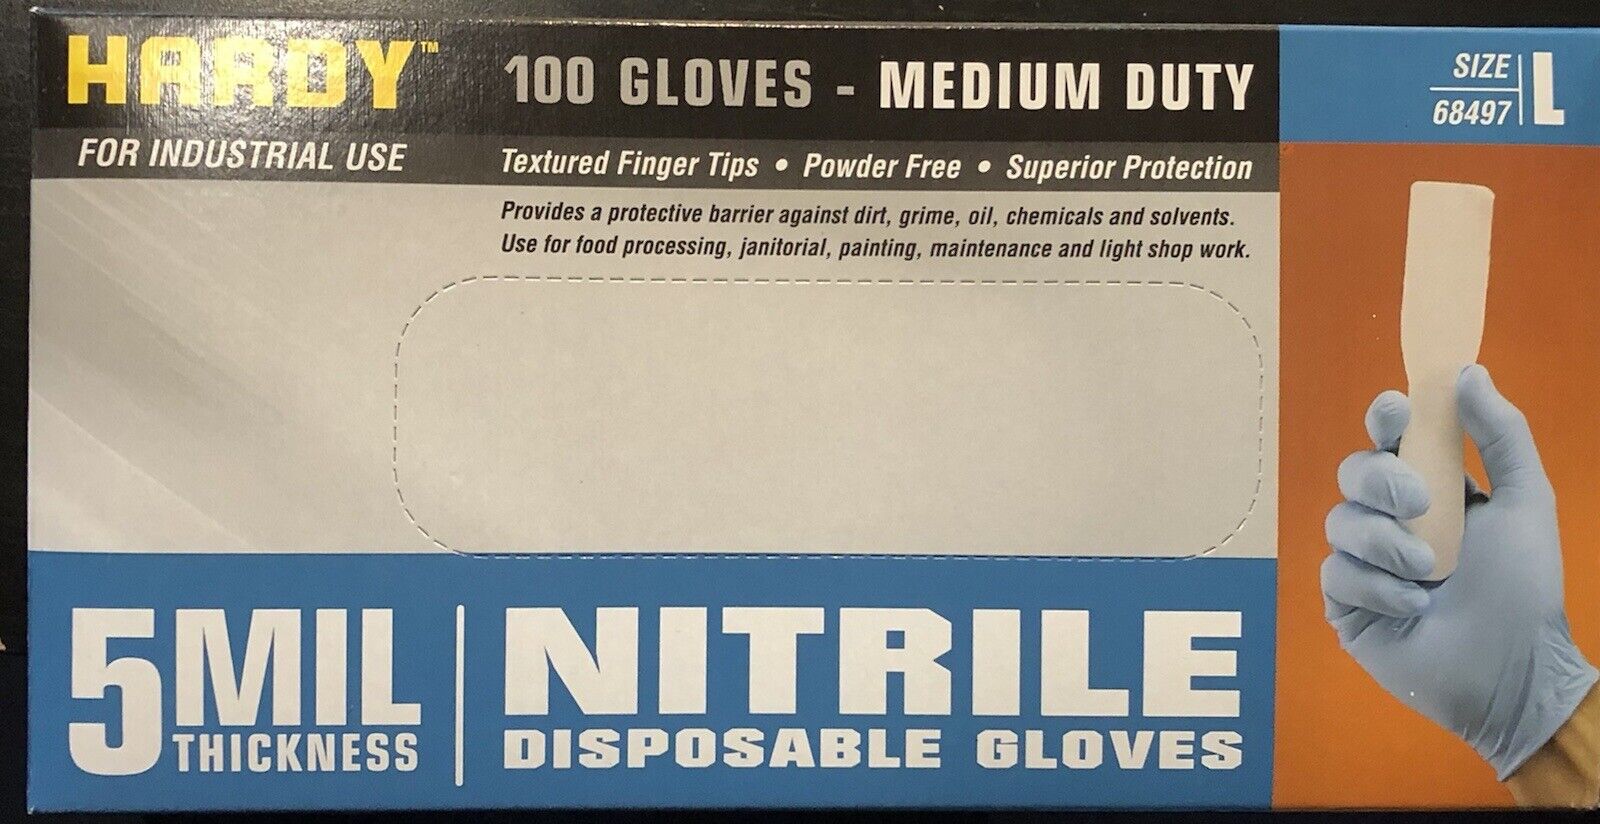 Hardy 100 5mil Thickness Nitrile Disposable Gloves Large 68497 Powder Free